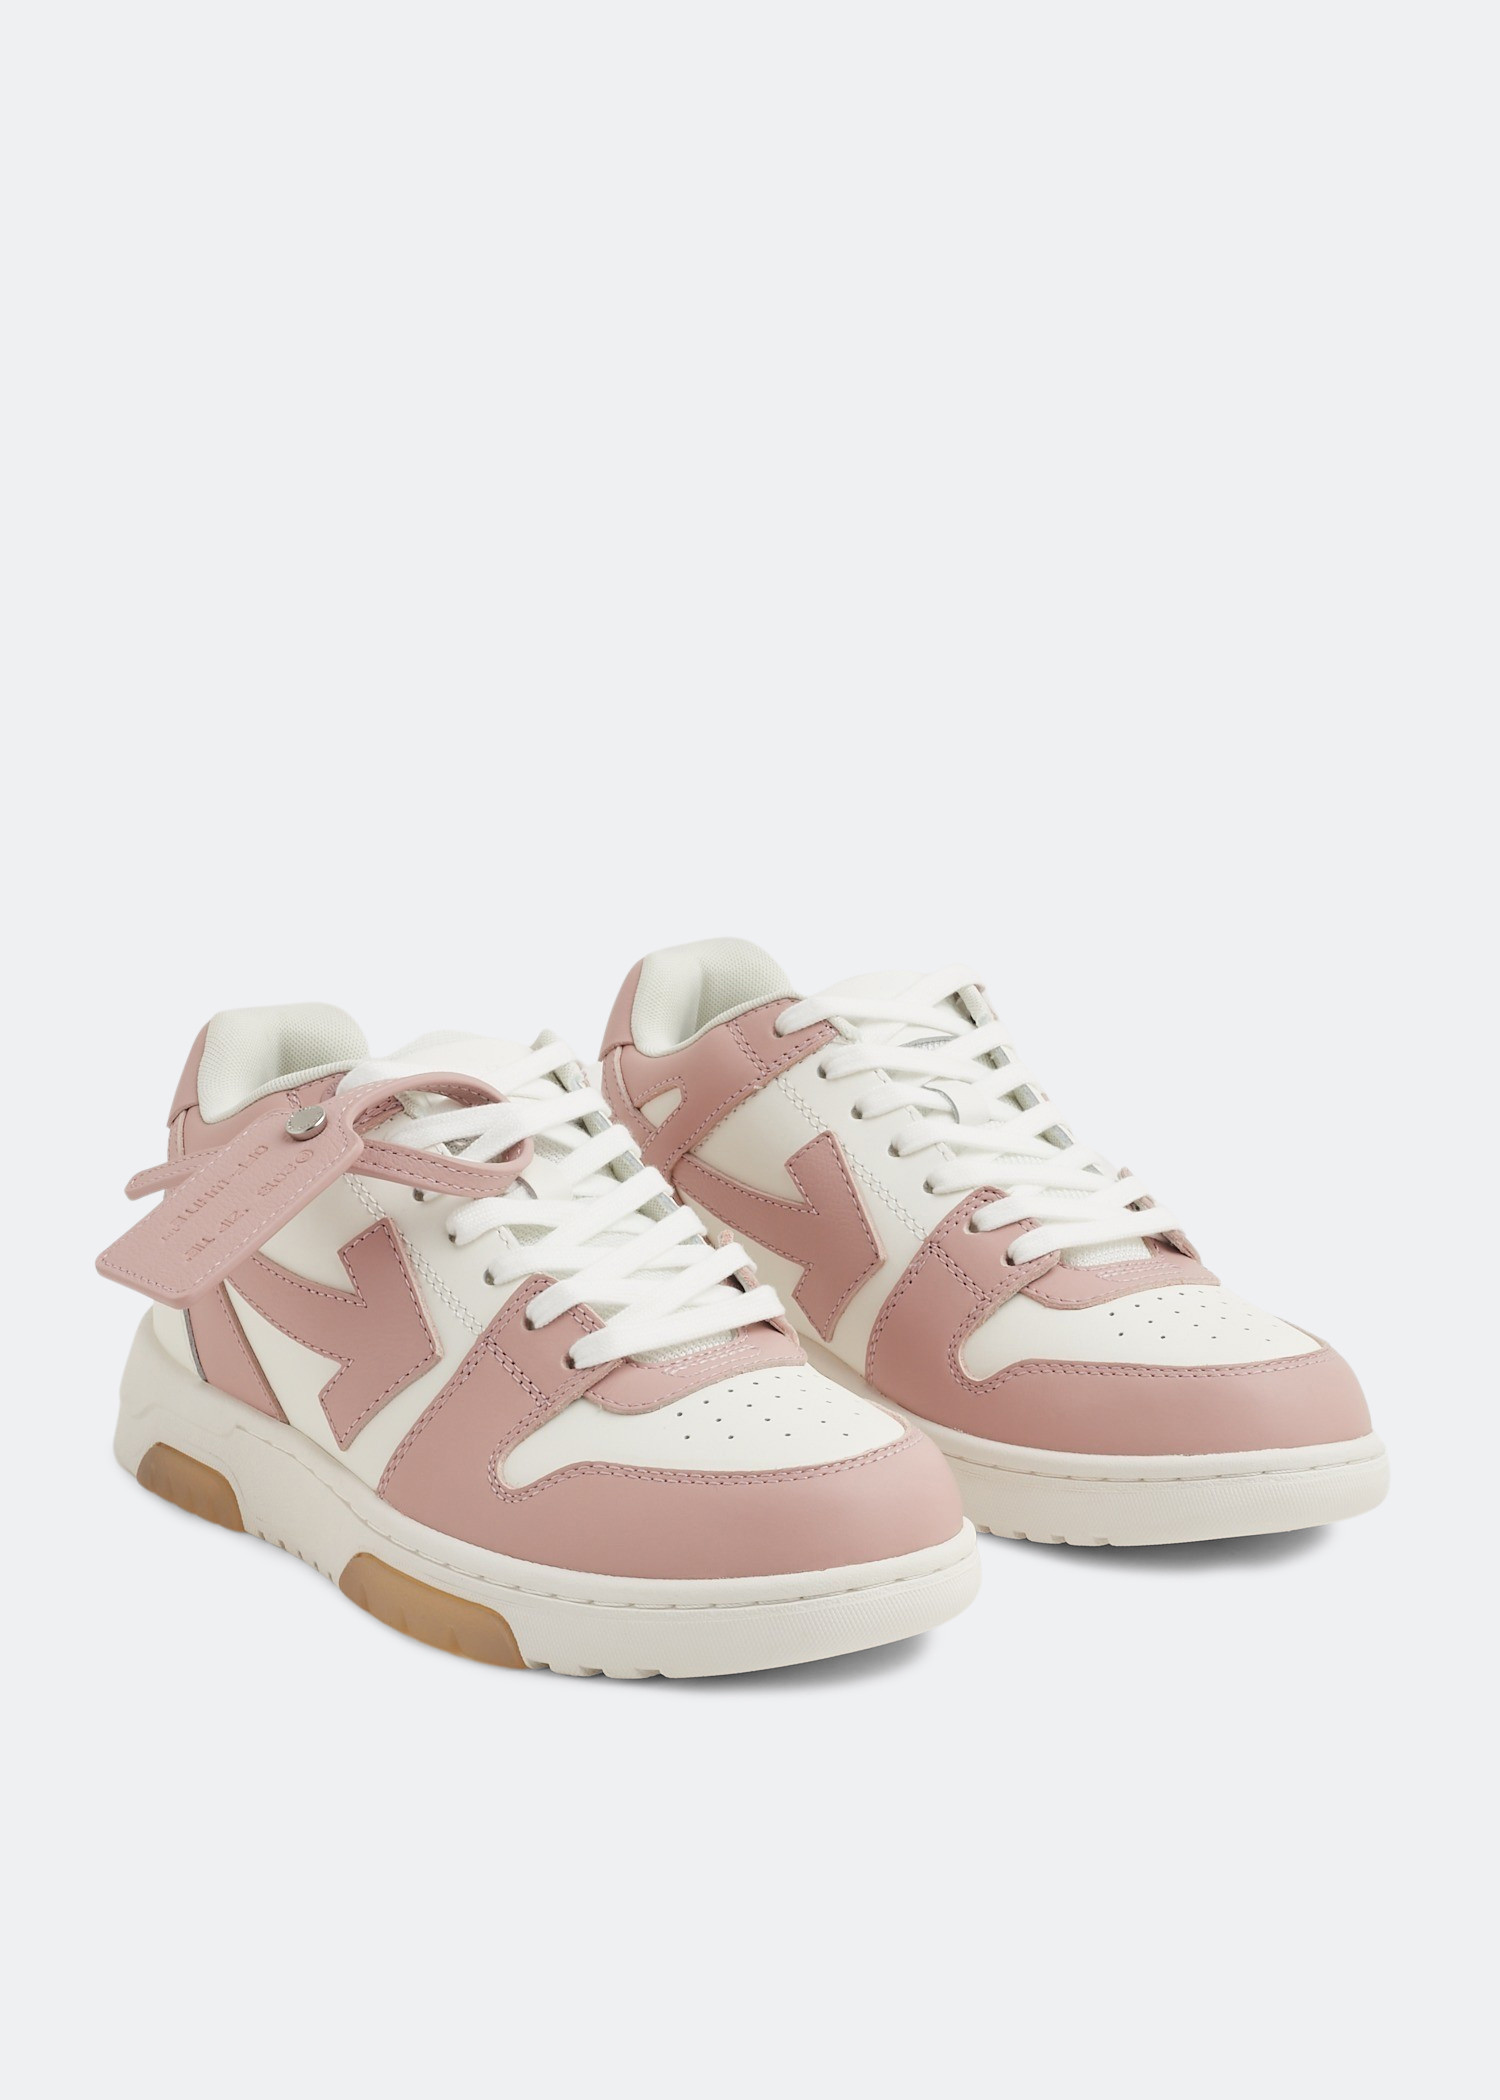 Off-White Out Of Office 'OOO' sneakers for Women - White in KSA 